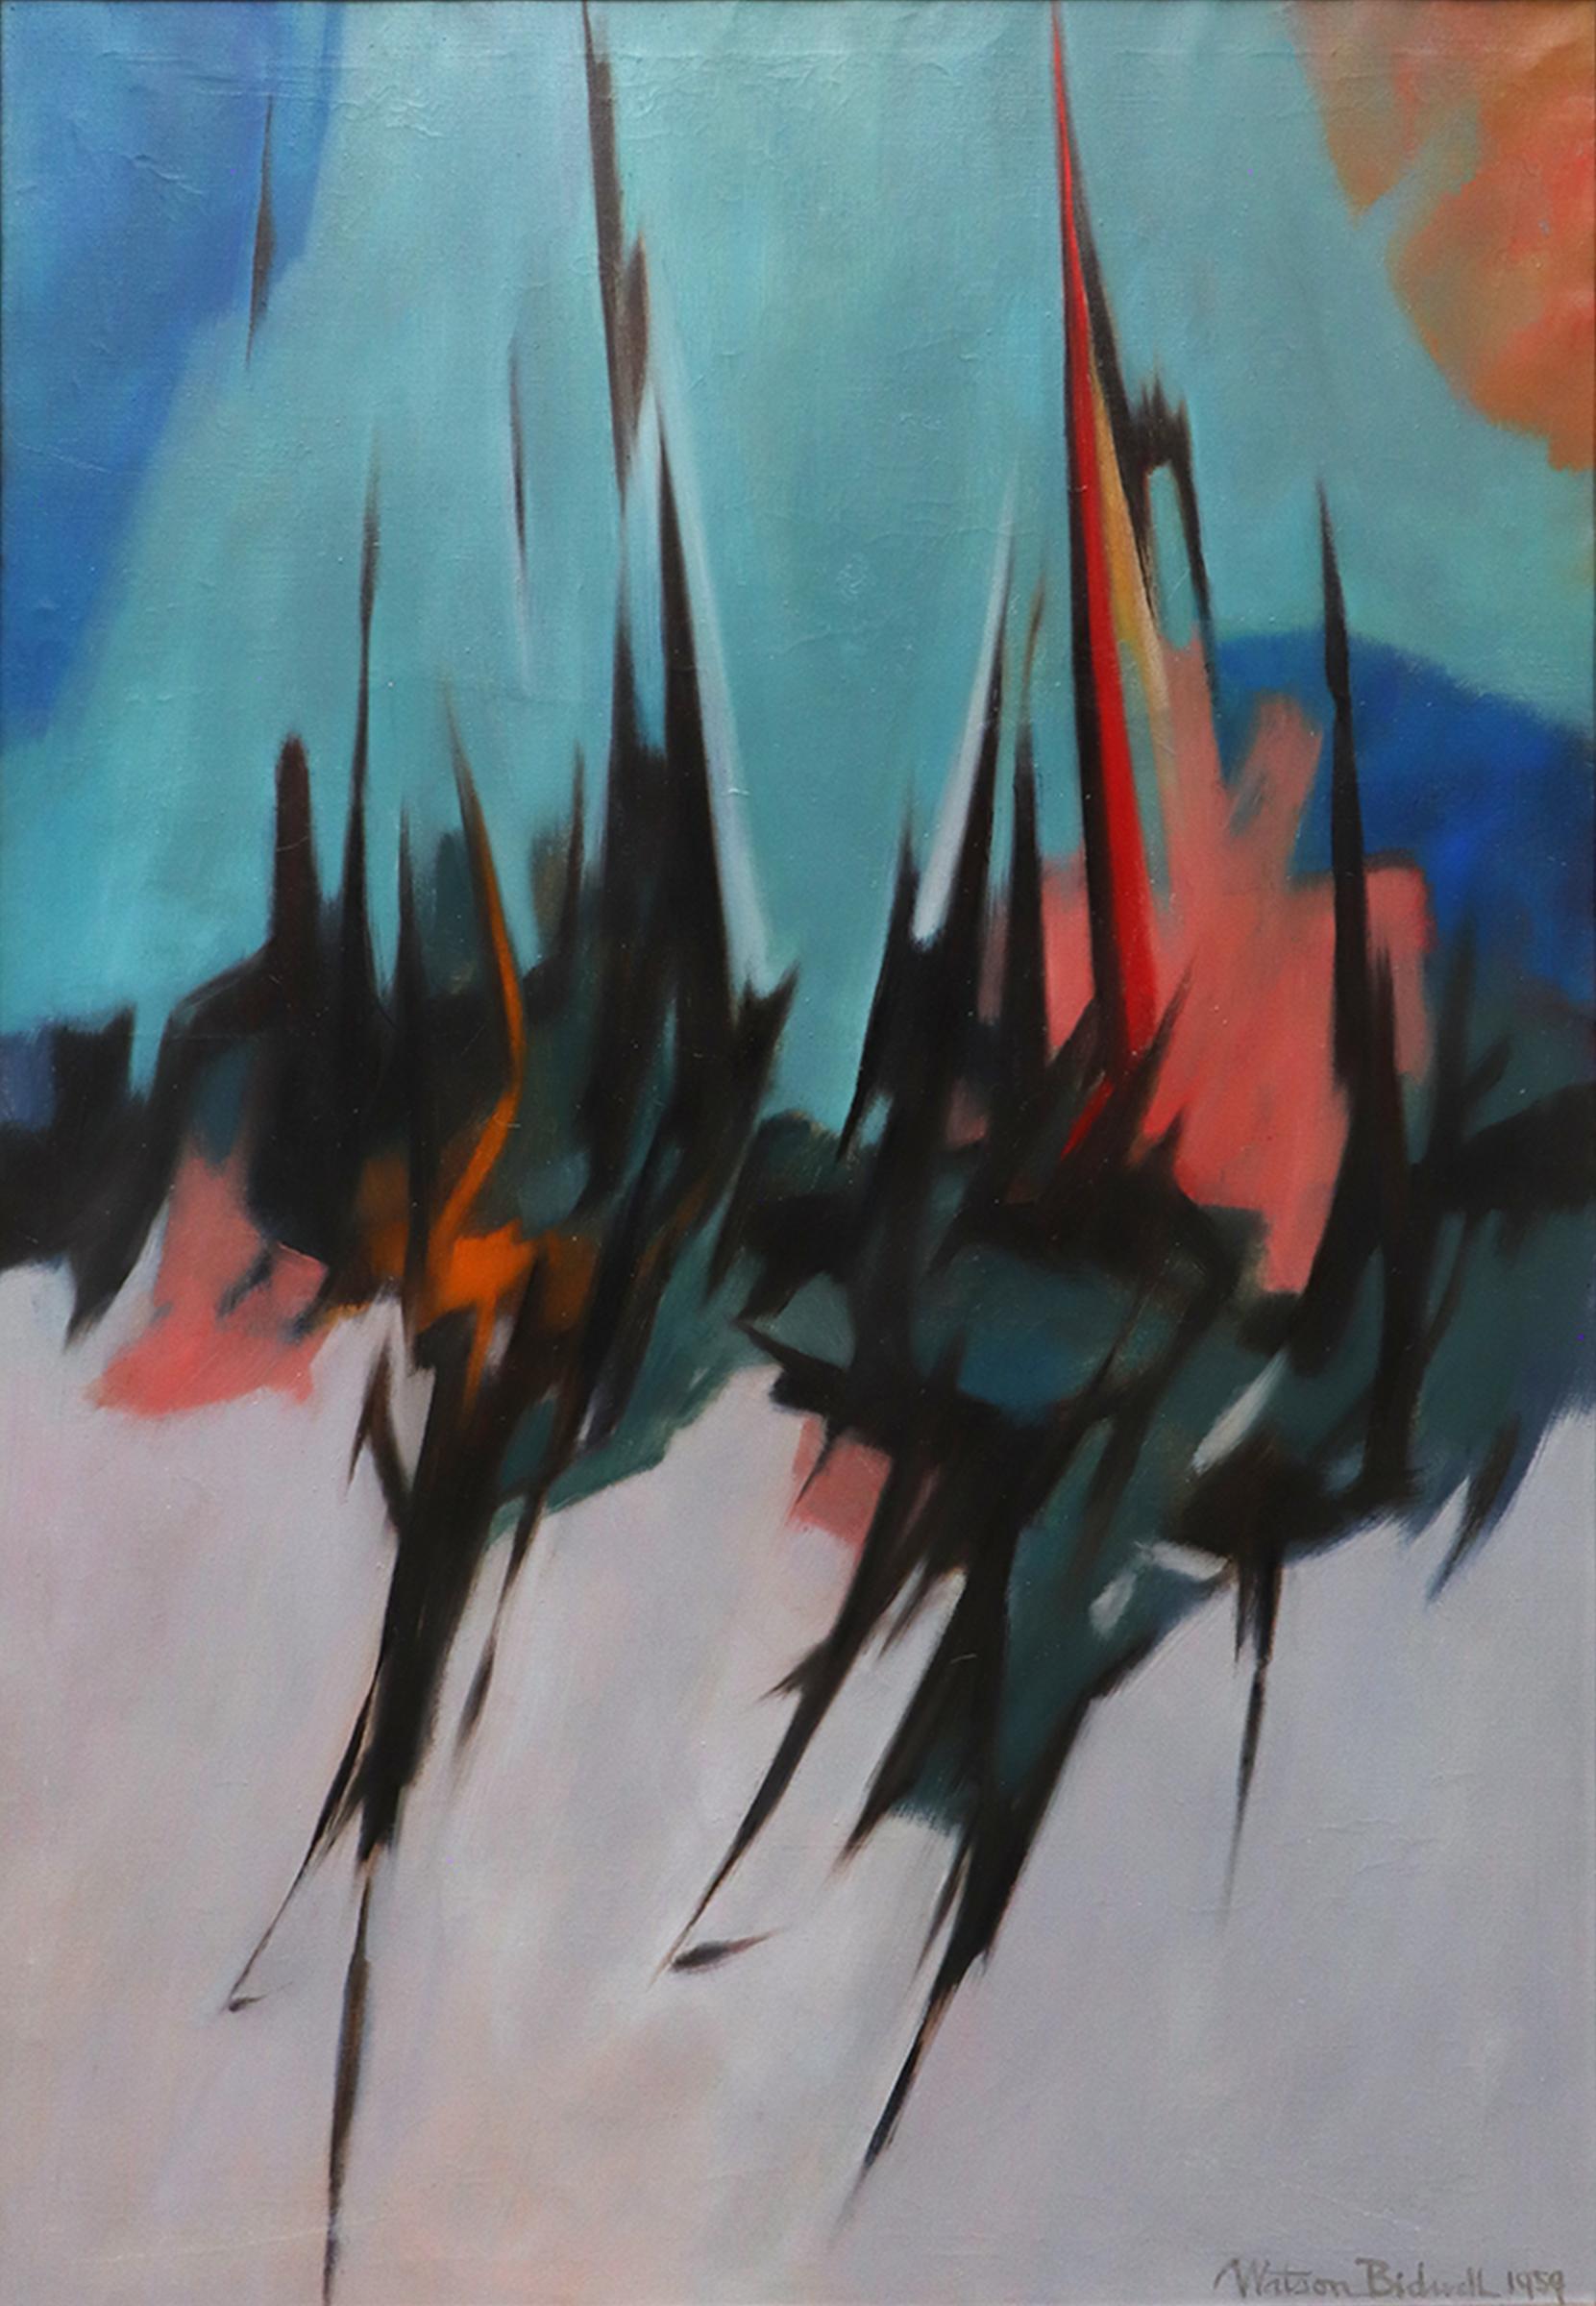 Oil on canvas abstract painting titled 'Out of the Deep' by Watson Bidwell (1904-1964) from 1959. Presented in a custom frame measuring 51 ½ x 37 ½ inches; image size is 50 x 36 ½ inches.

Vertical medium scale painting, abstract composition